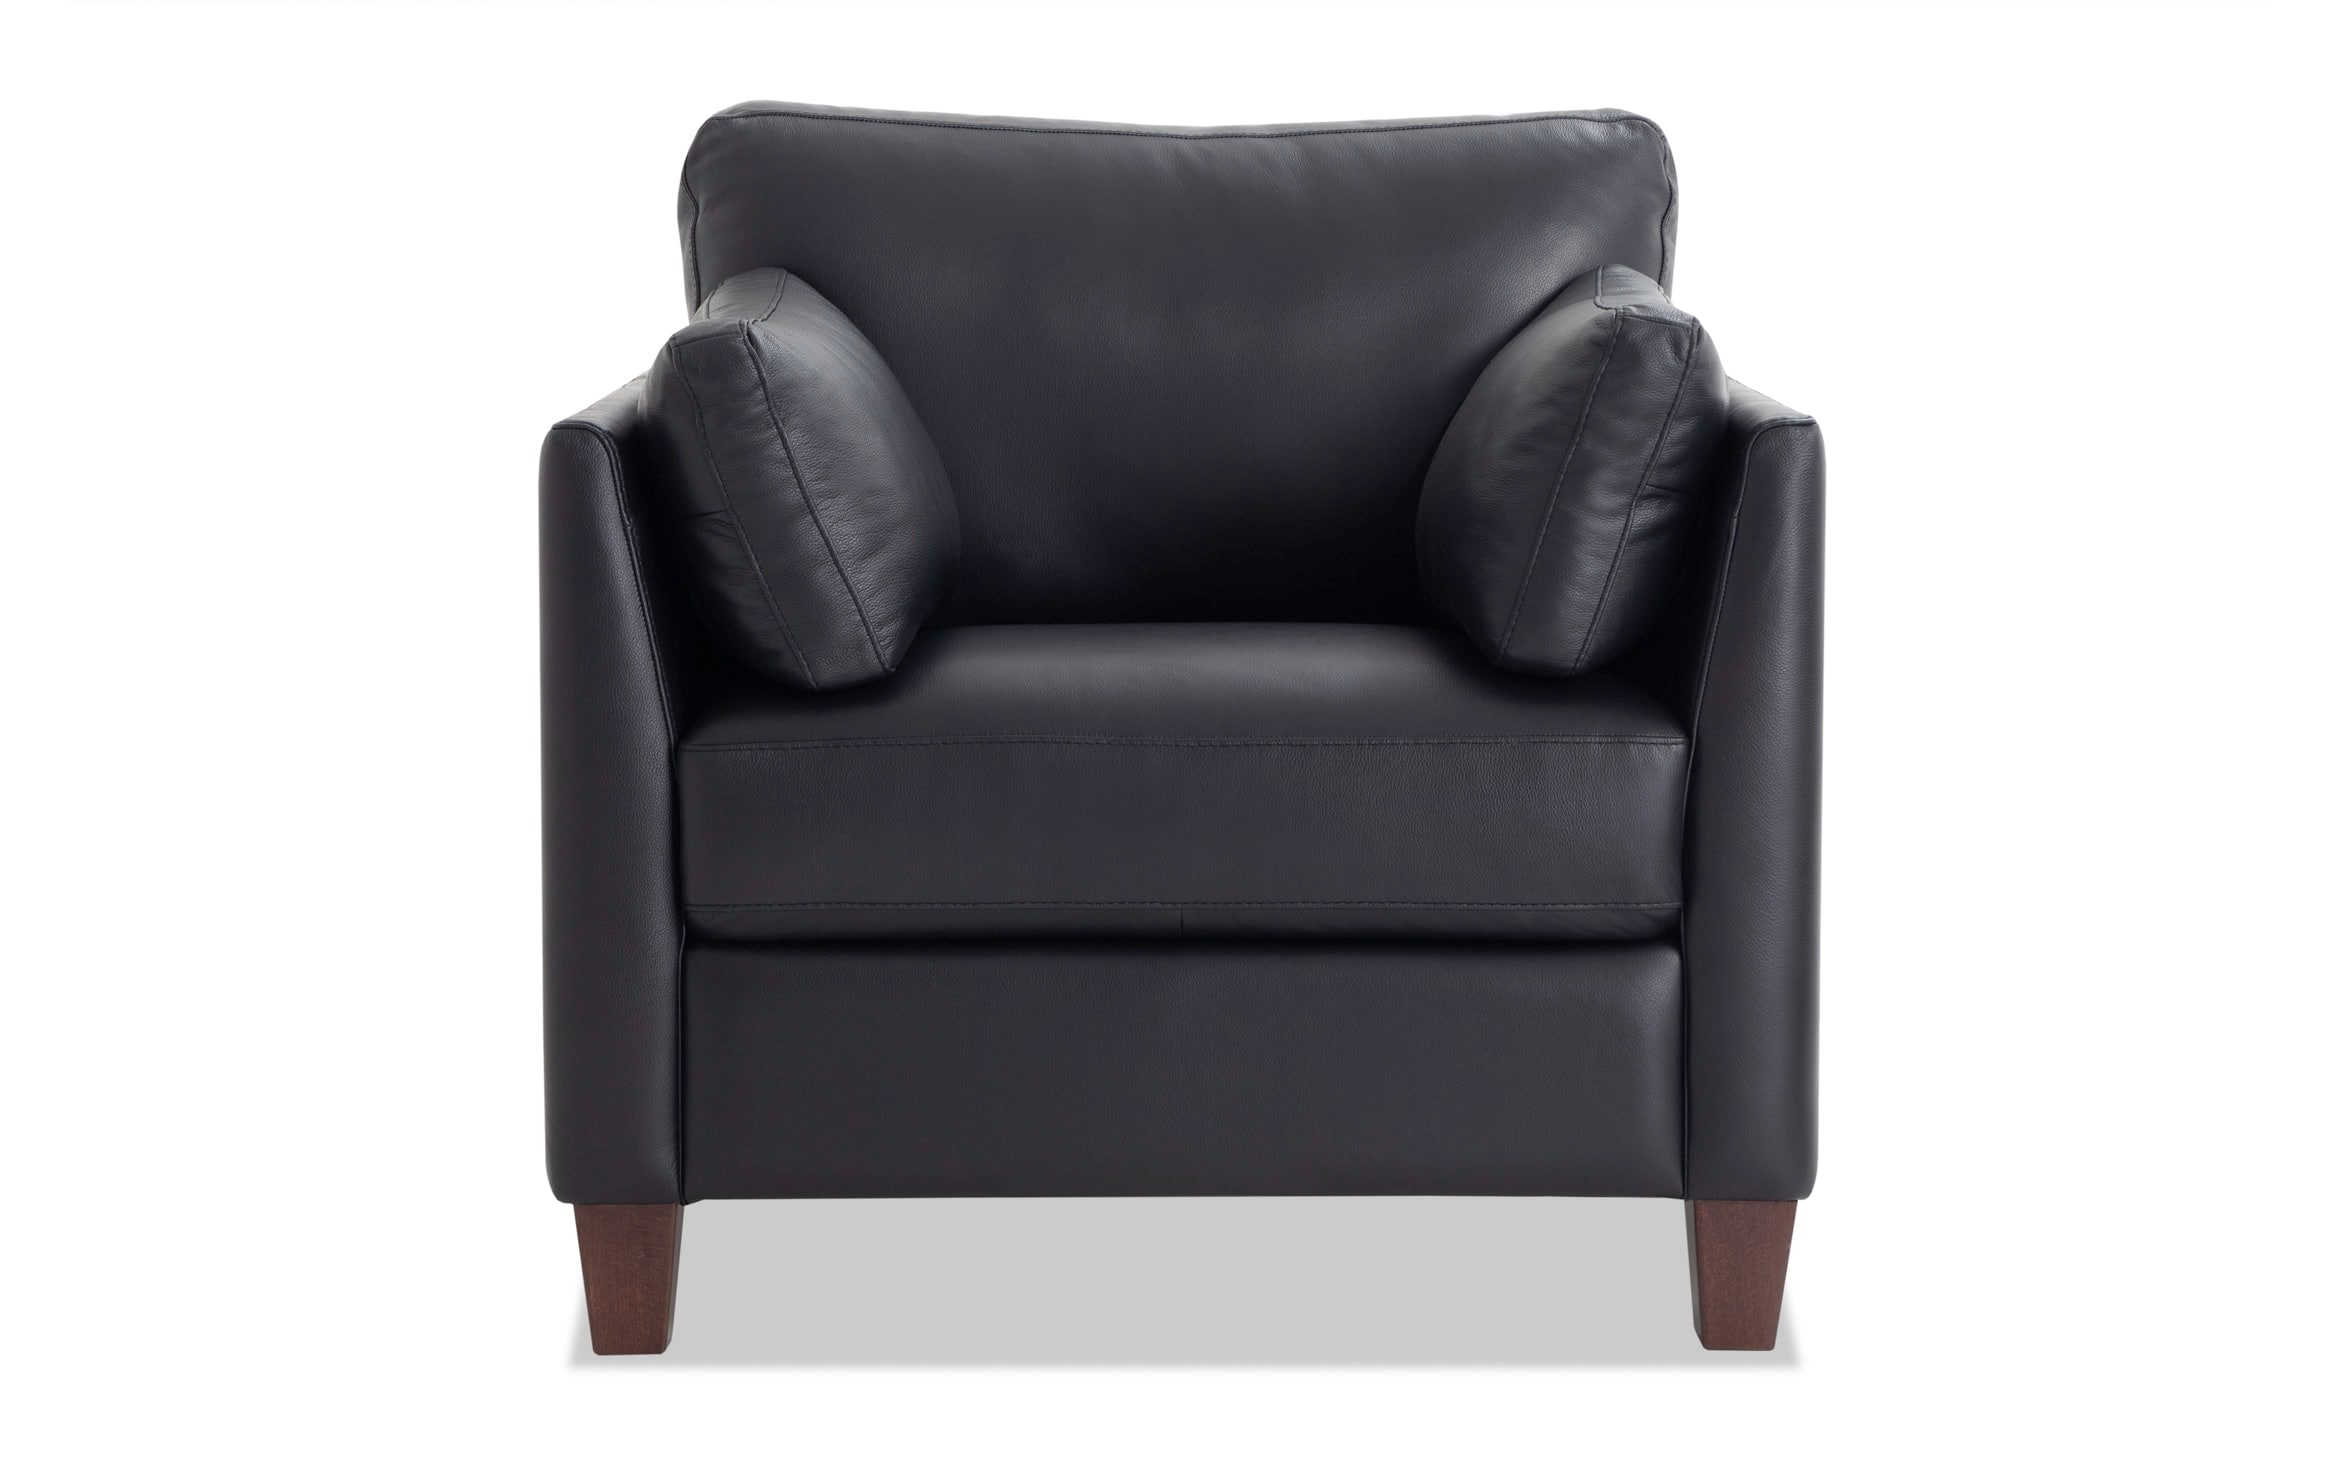 Antonio Black Leather Chair Bob S, Black And White Leather Chair